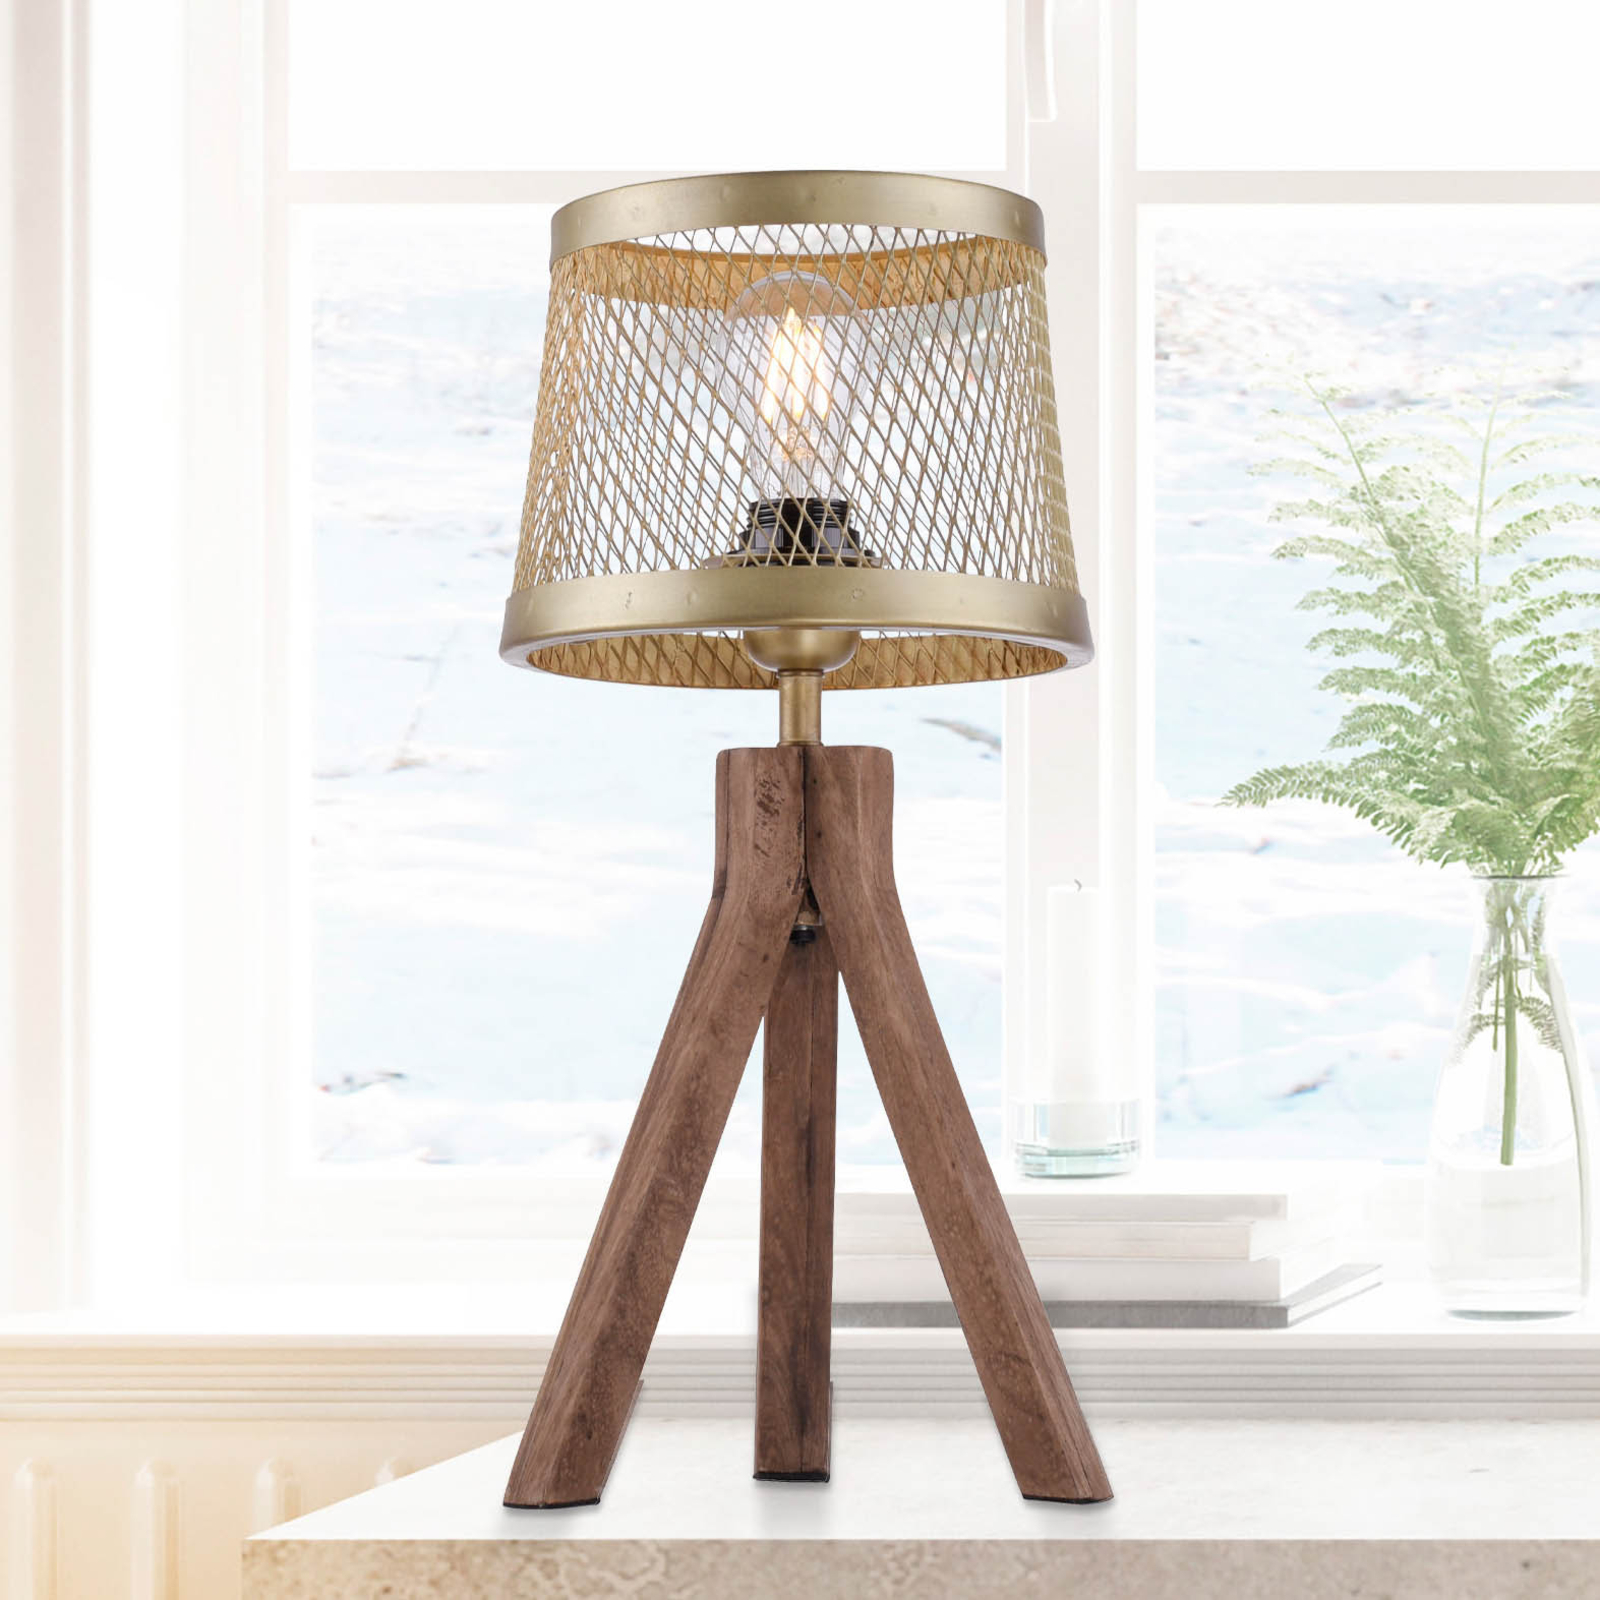 Frederik table lamp made of wood, tripod